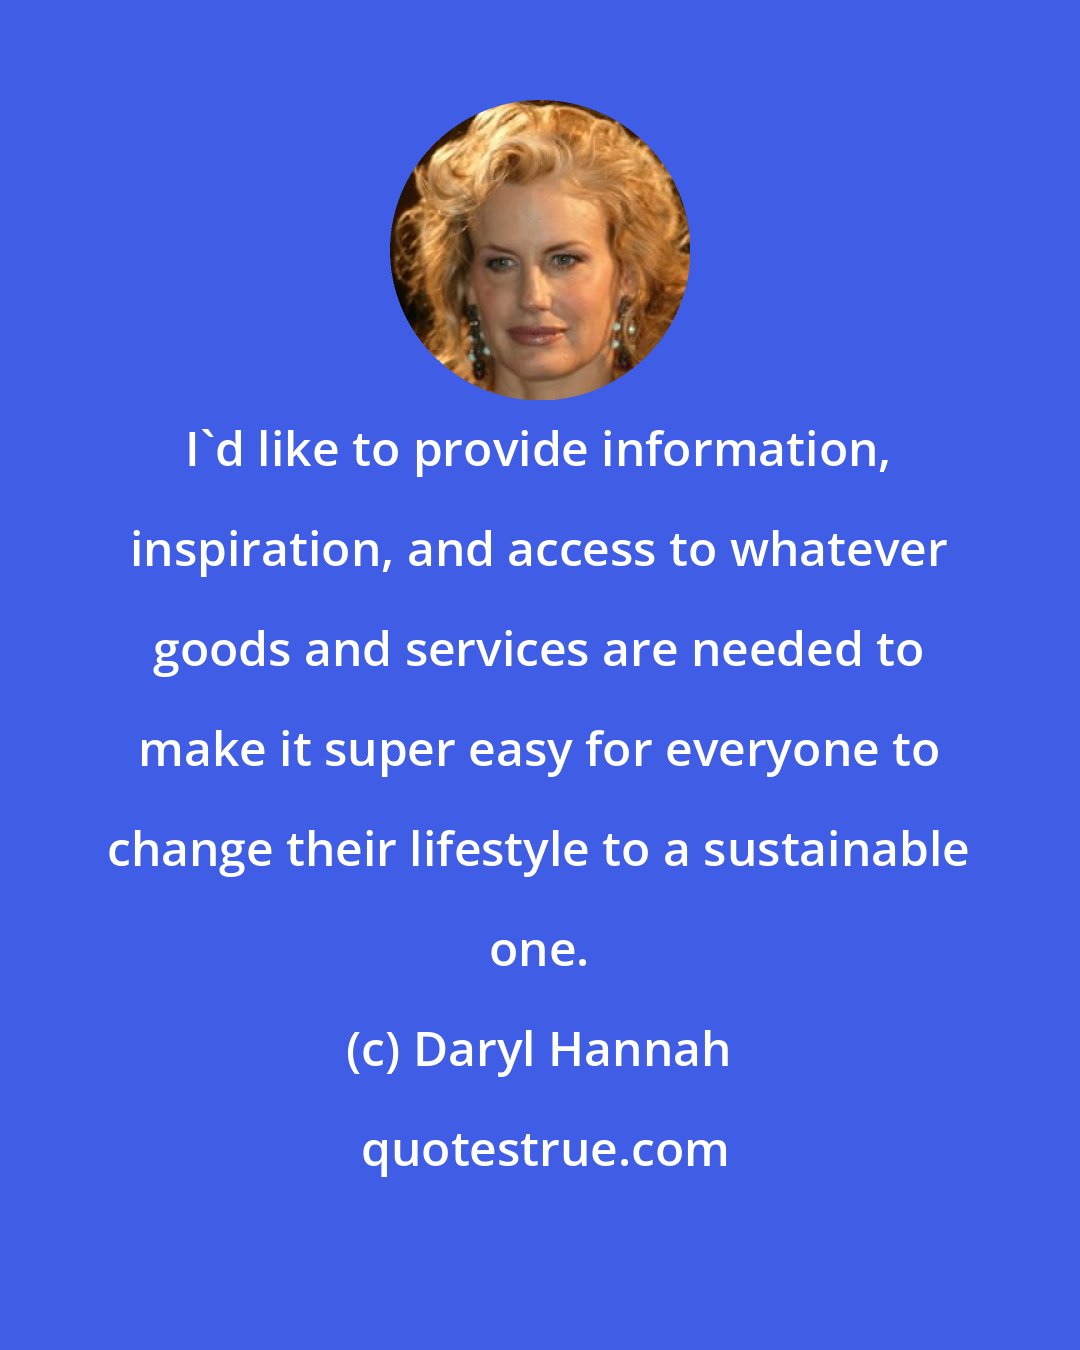 Daryl Hannah: I'd like to provide information, inspiration, and access to whatever goods and services are needed to make it super easy for everyone to change their lifestyle to a sustainable one.